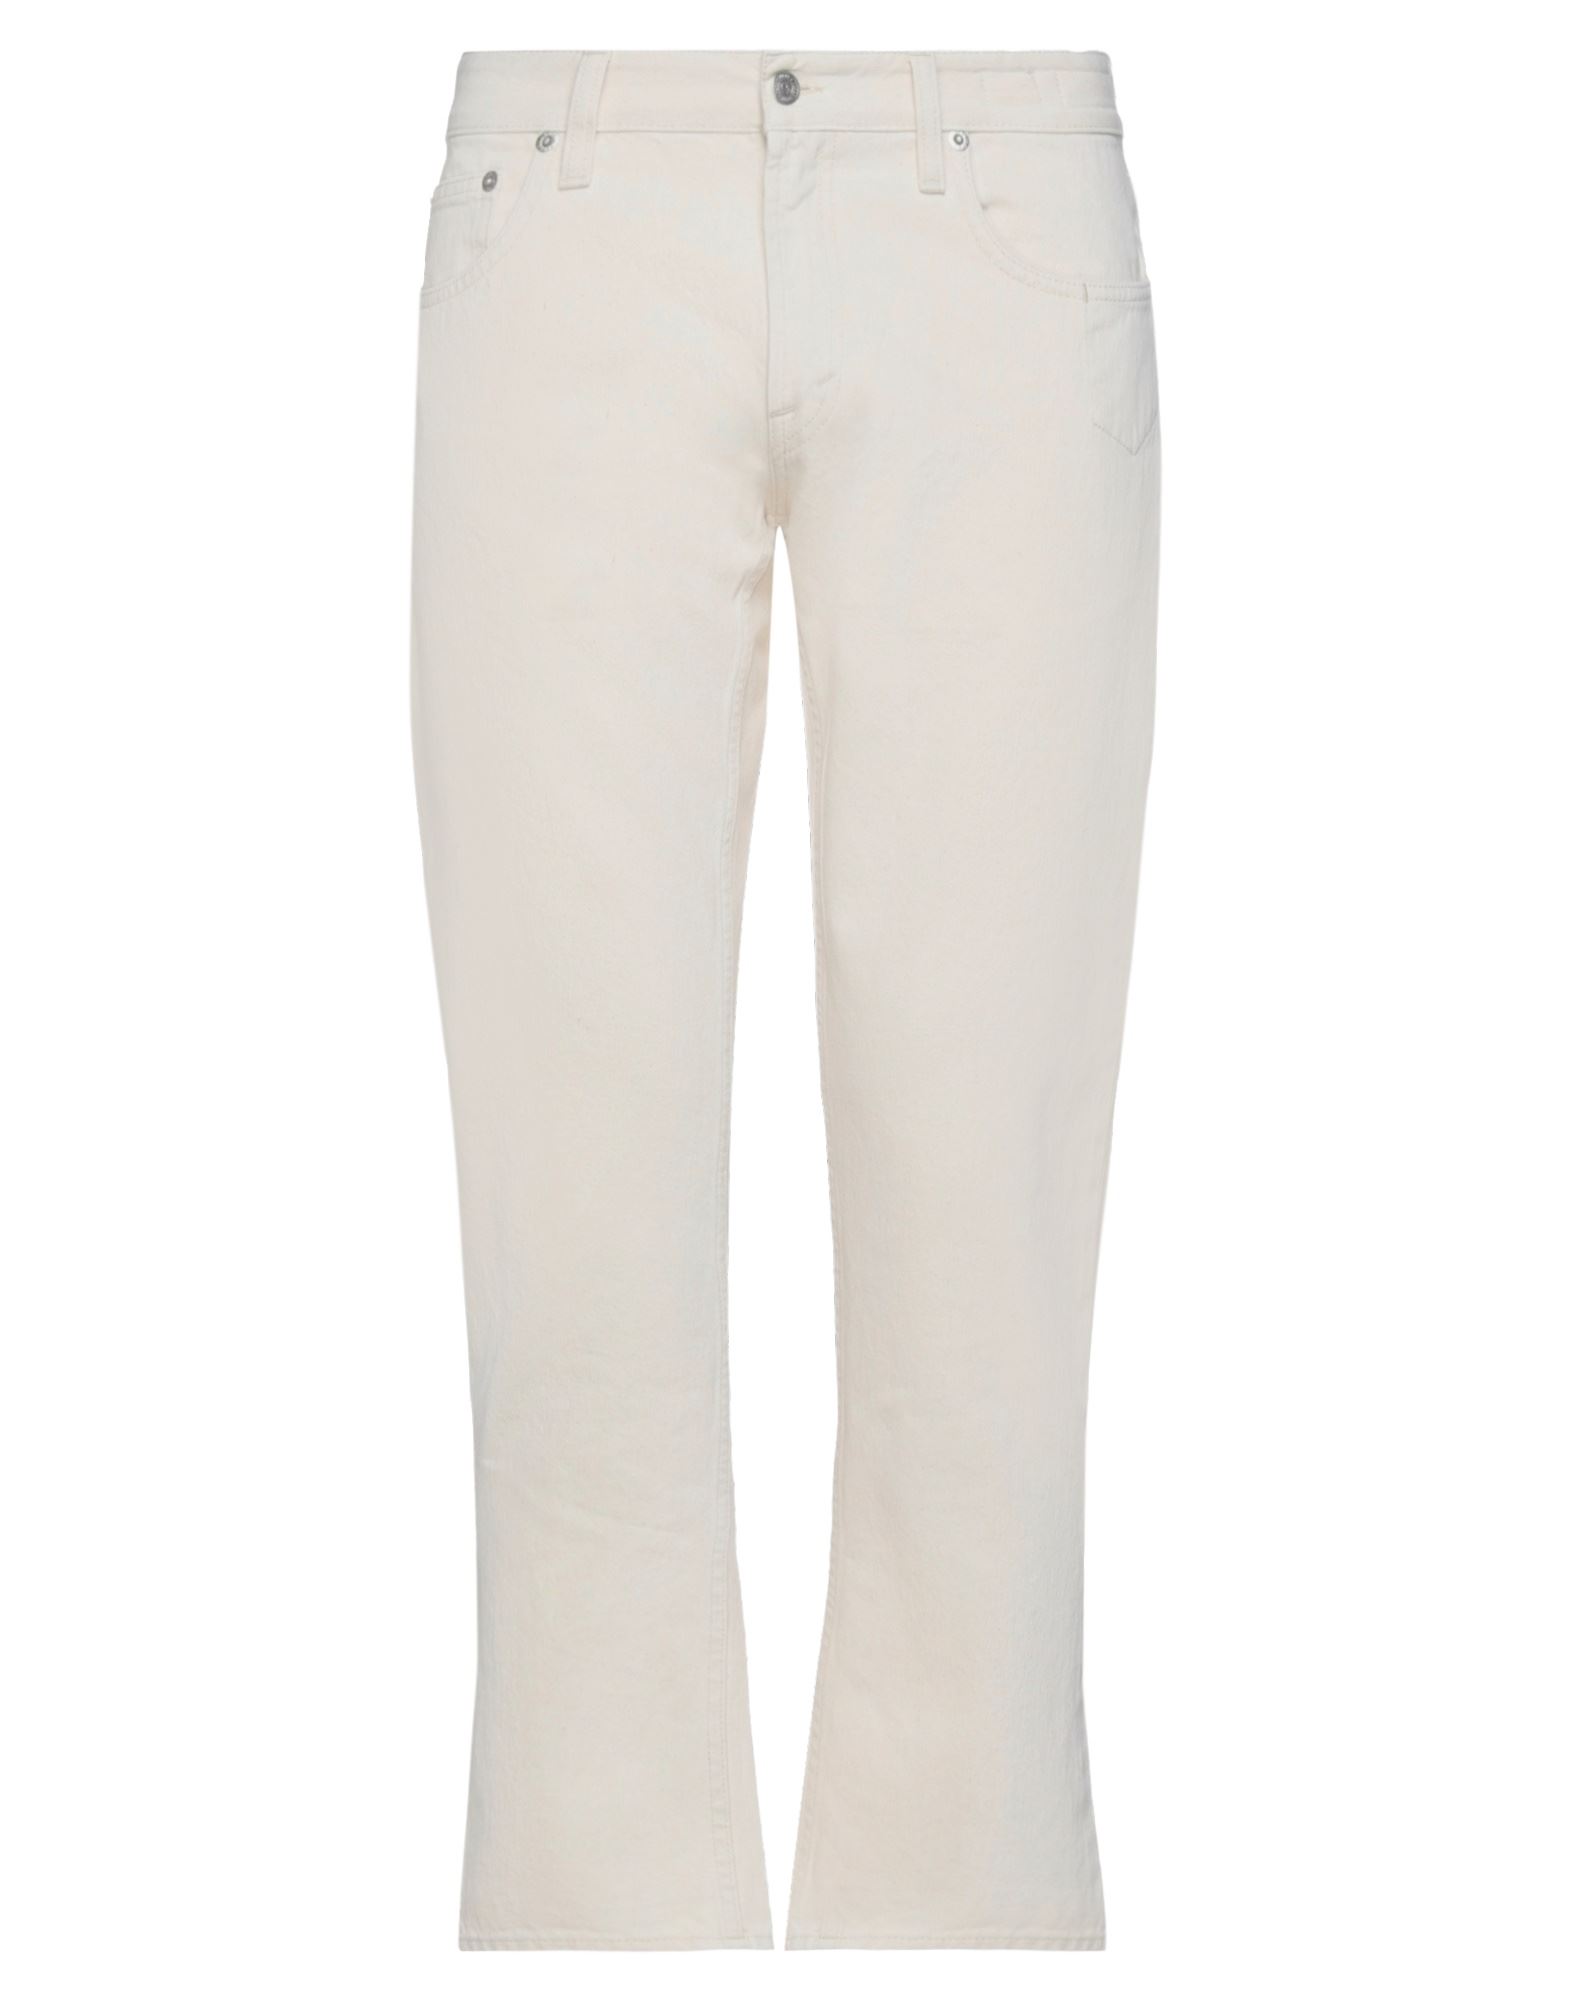 Department 5 Denim Cropped In White